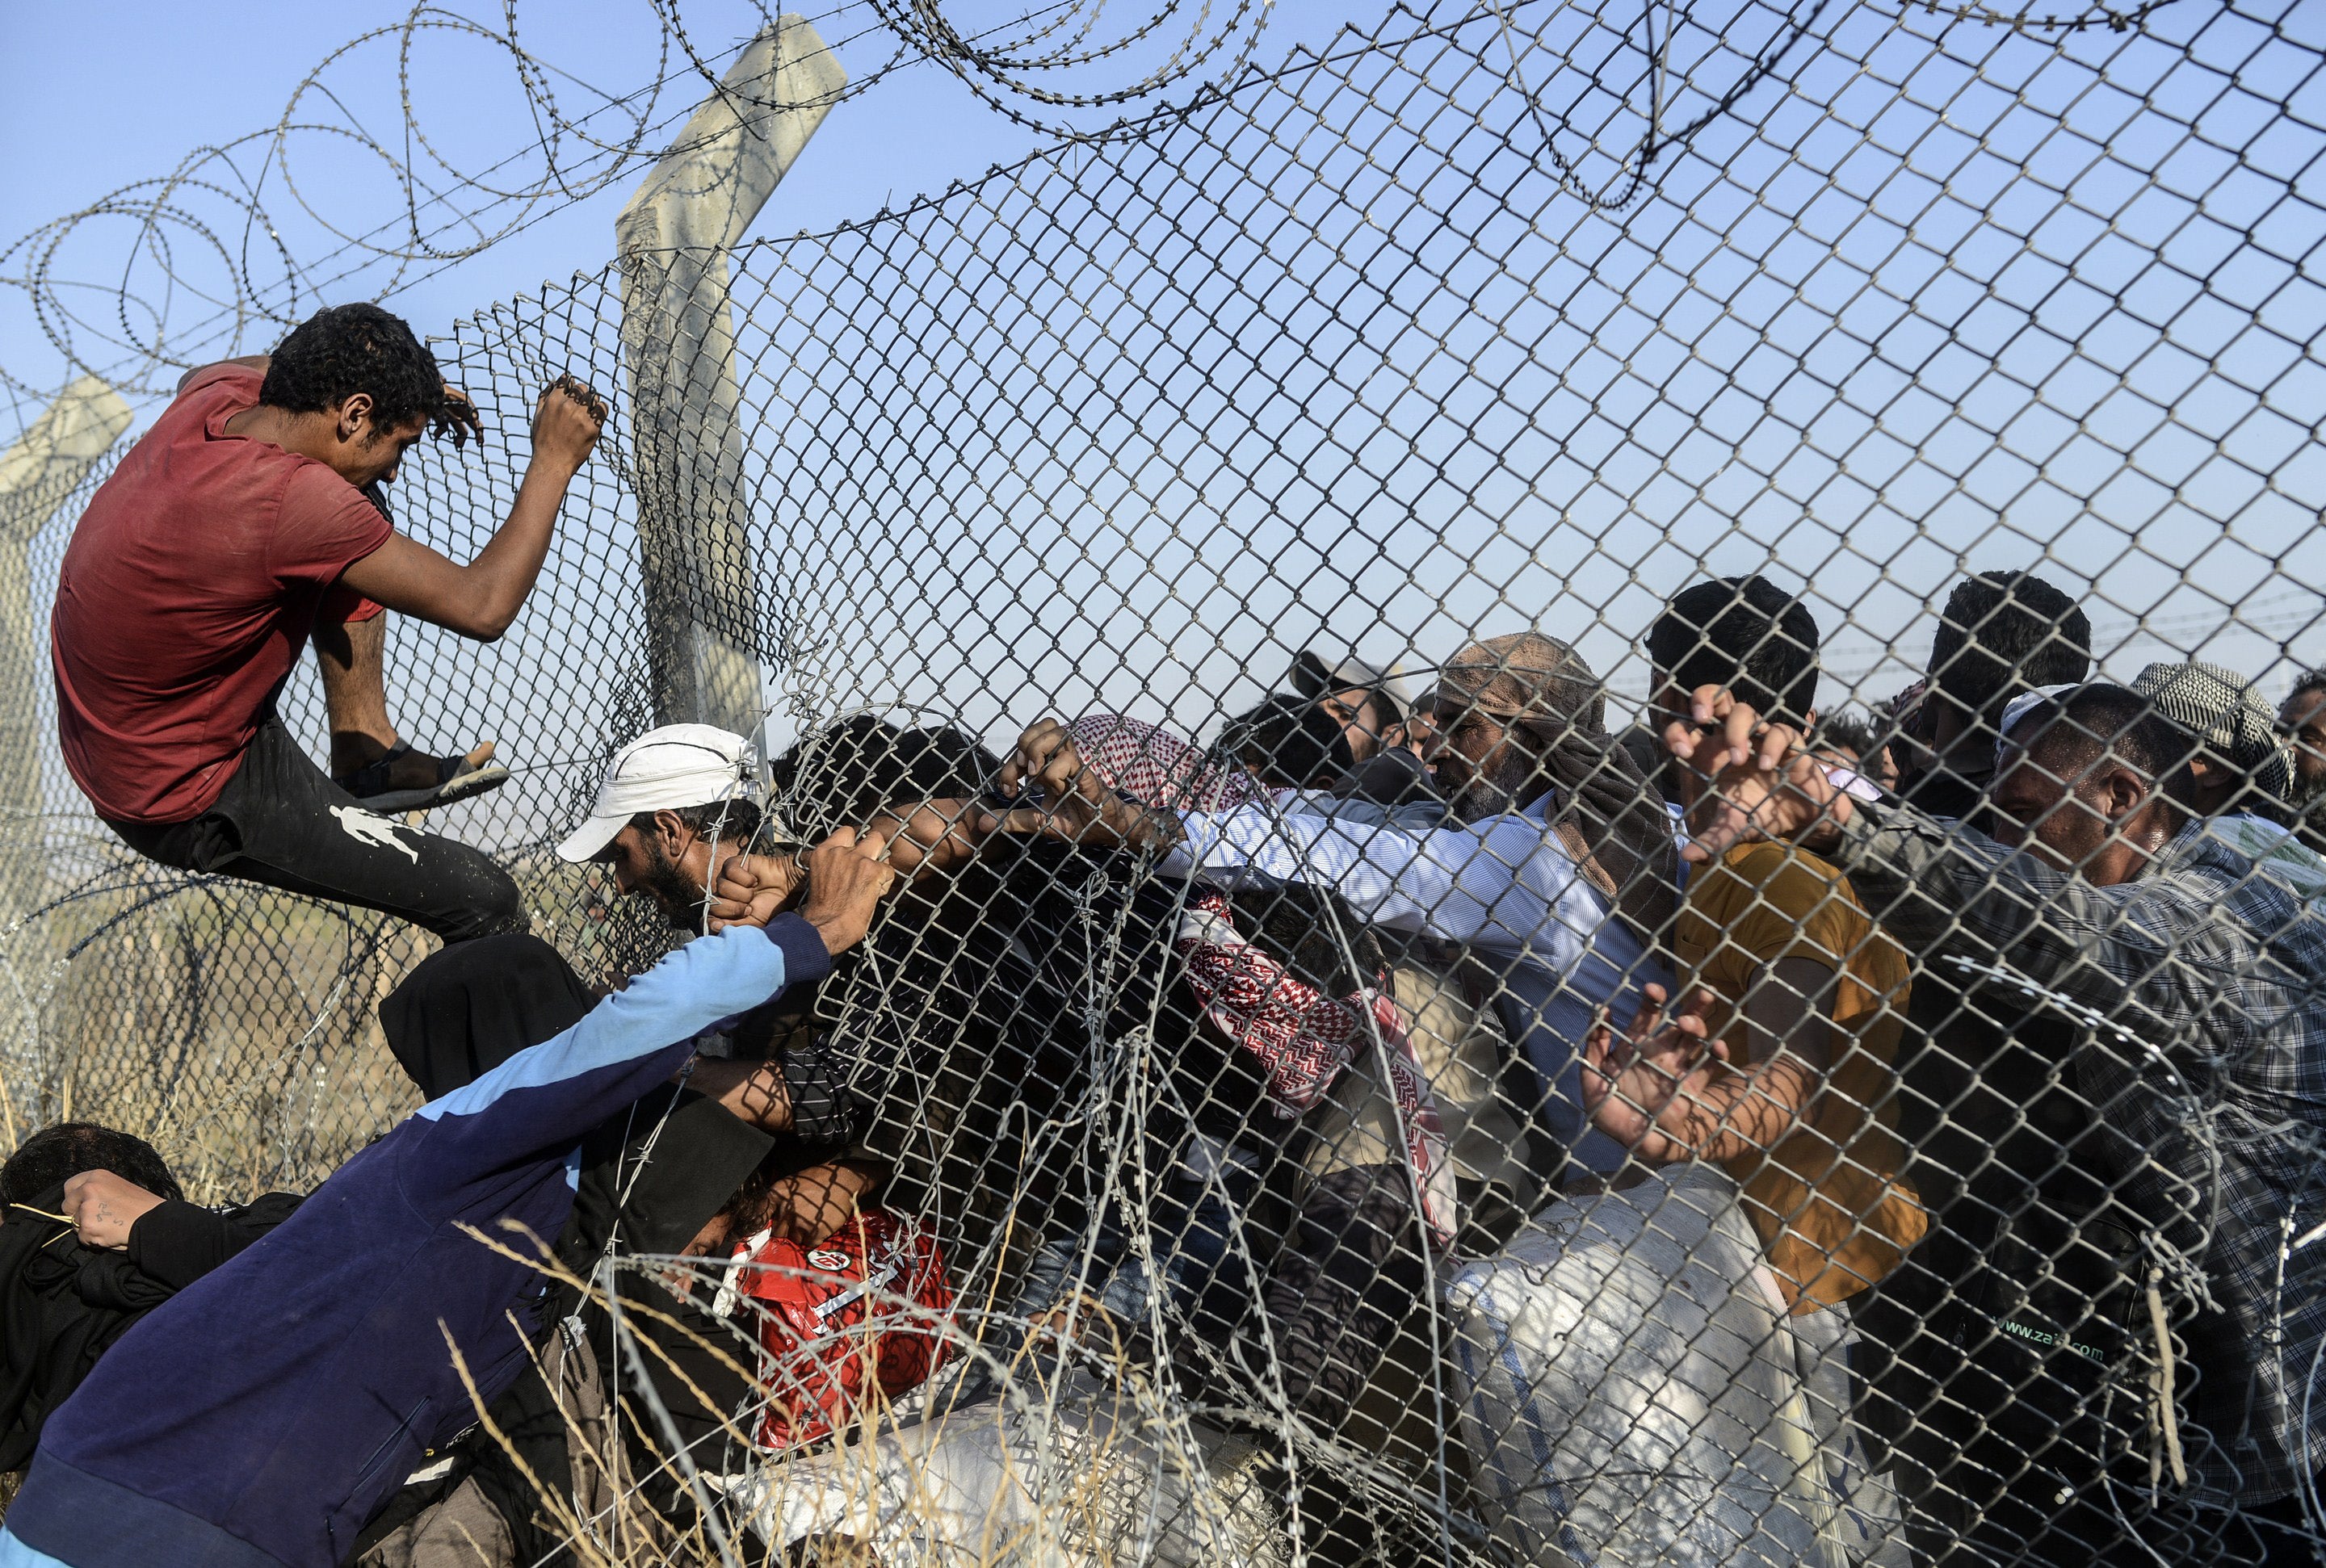 Thousands of refugees fled Syria as Isis violence continues (Photo: BULENT KILIC/AFP/Getty Images)